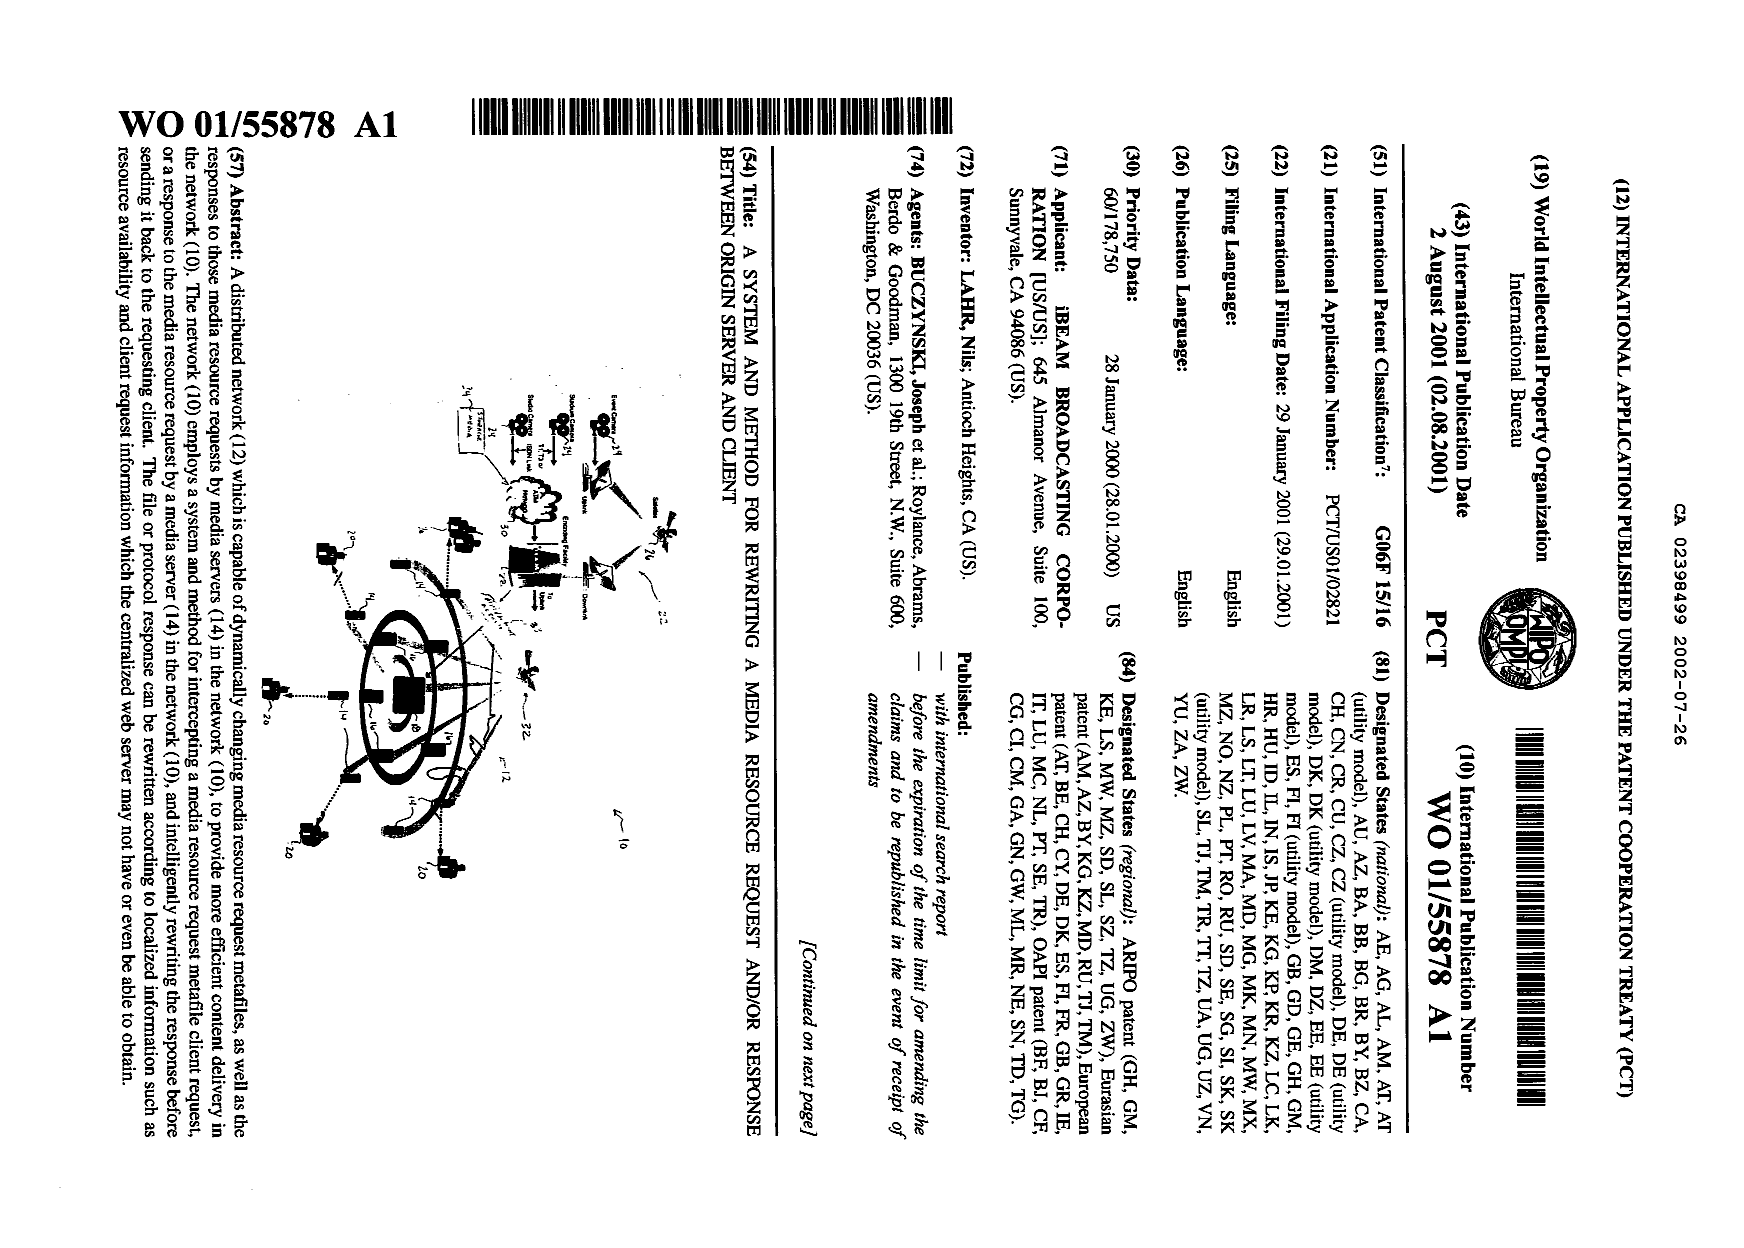 Canadian Patent Document 2398499. Abstract 20020726. Image 1 of 1